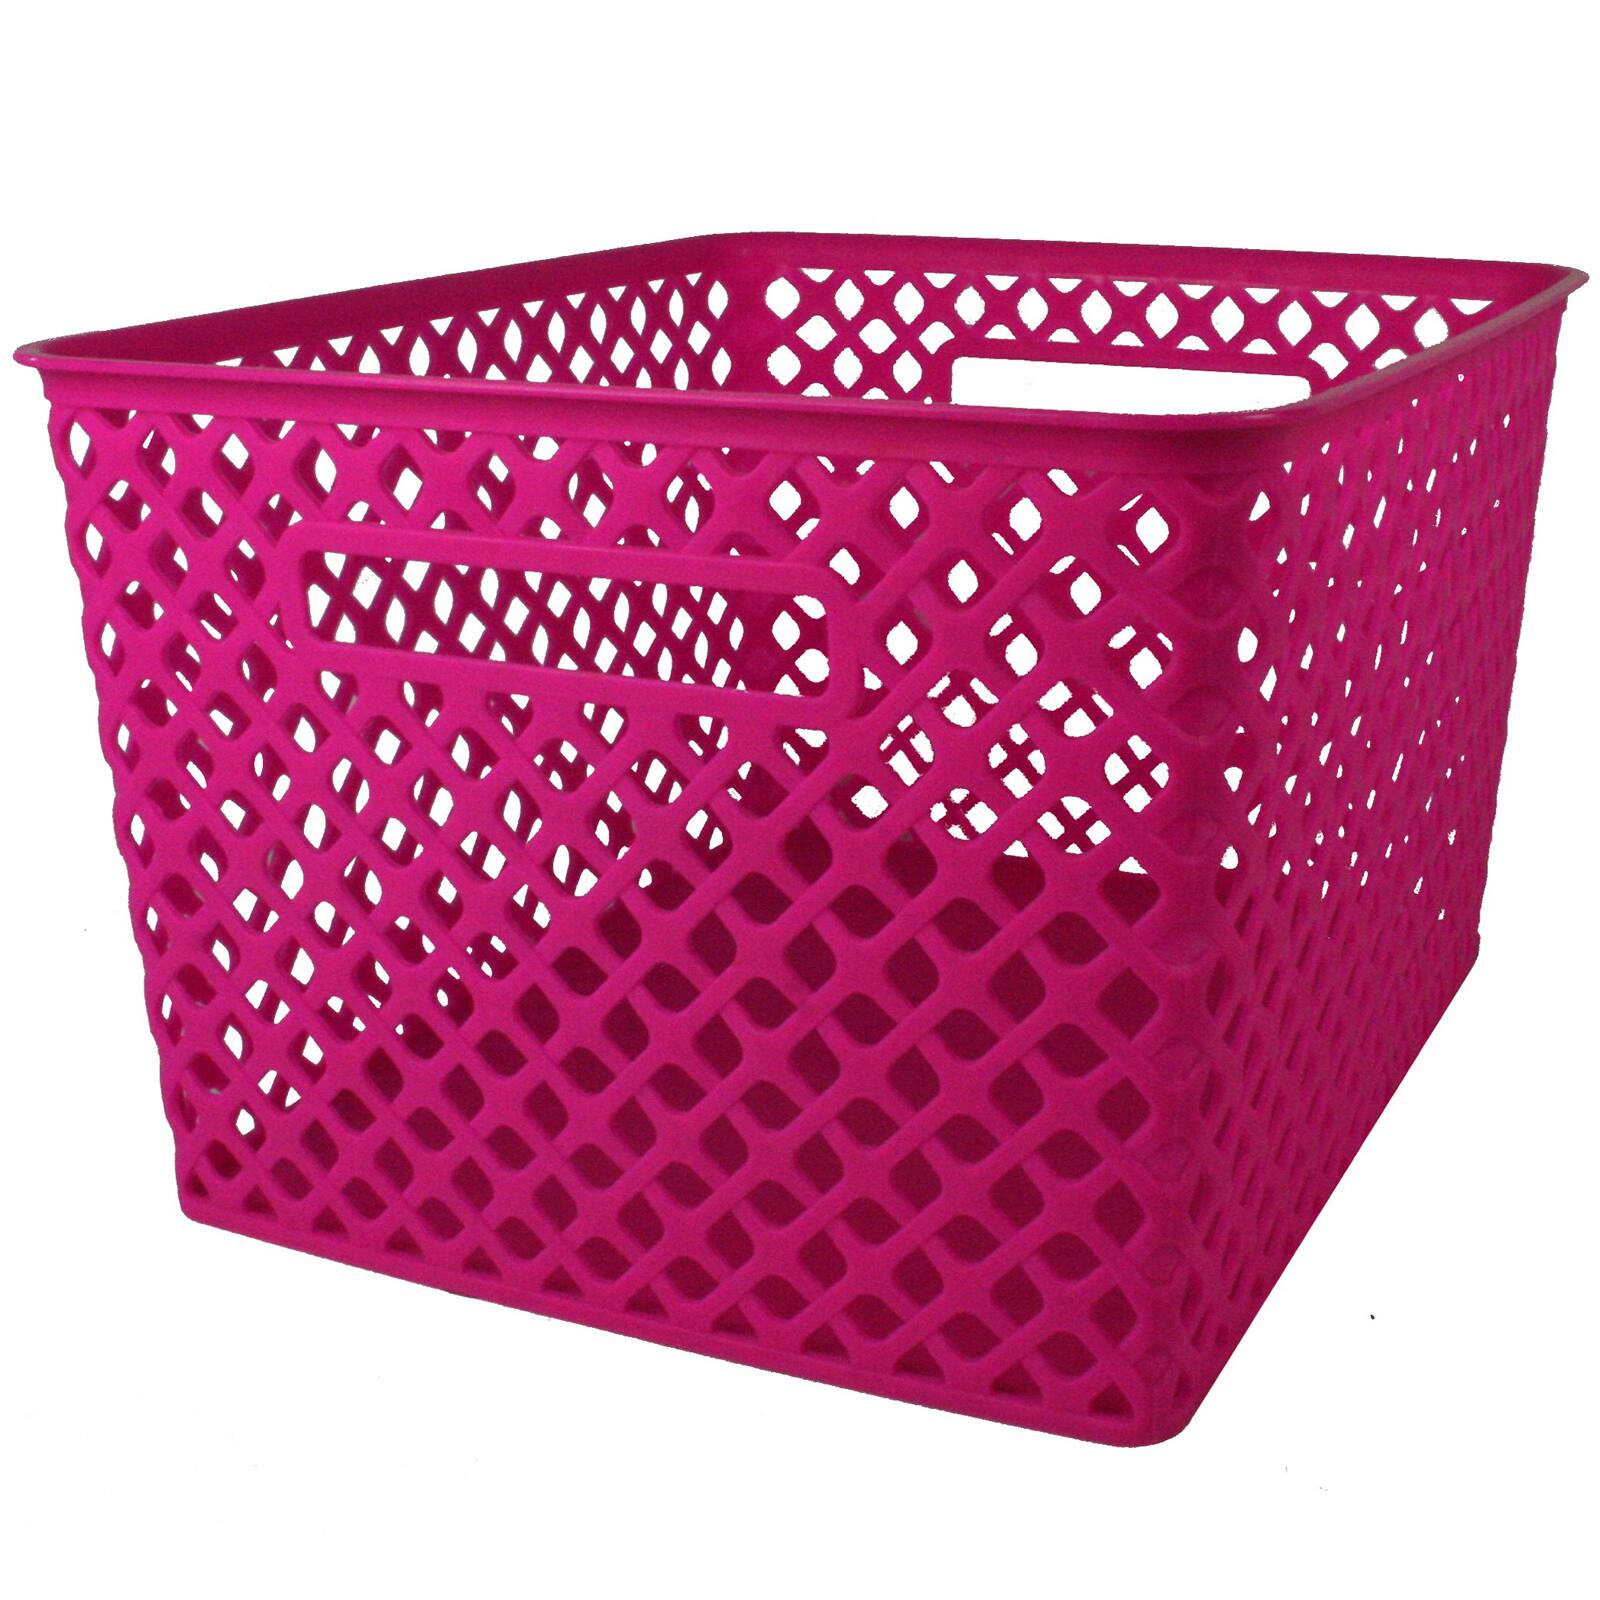 Shop the Romanoff® Large Woven Basket, Pack of 3 at Michaels